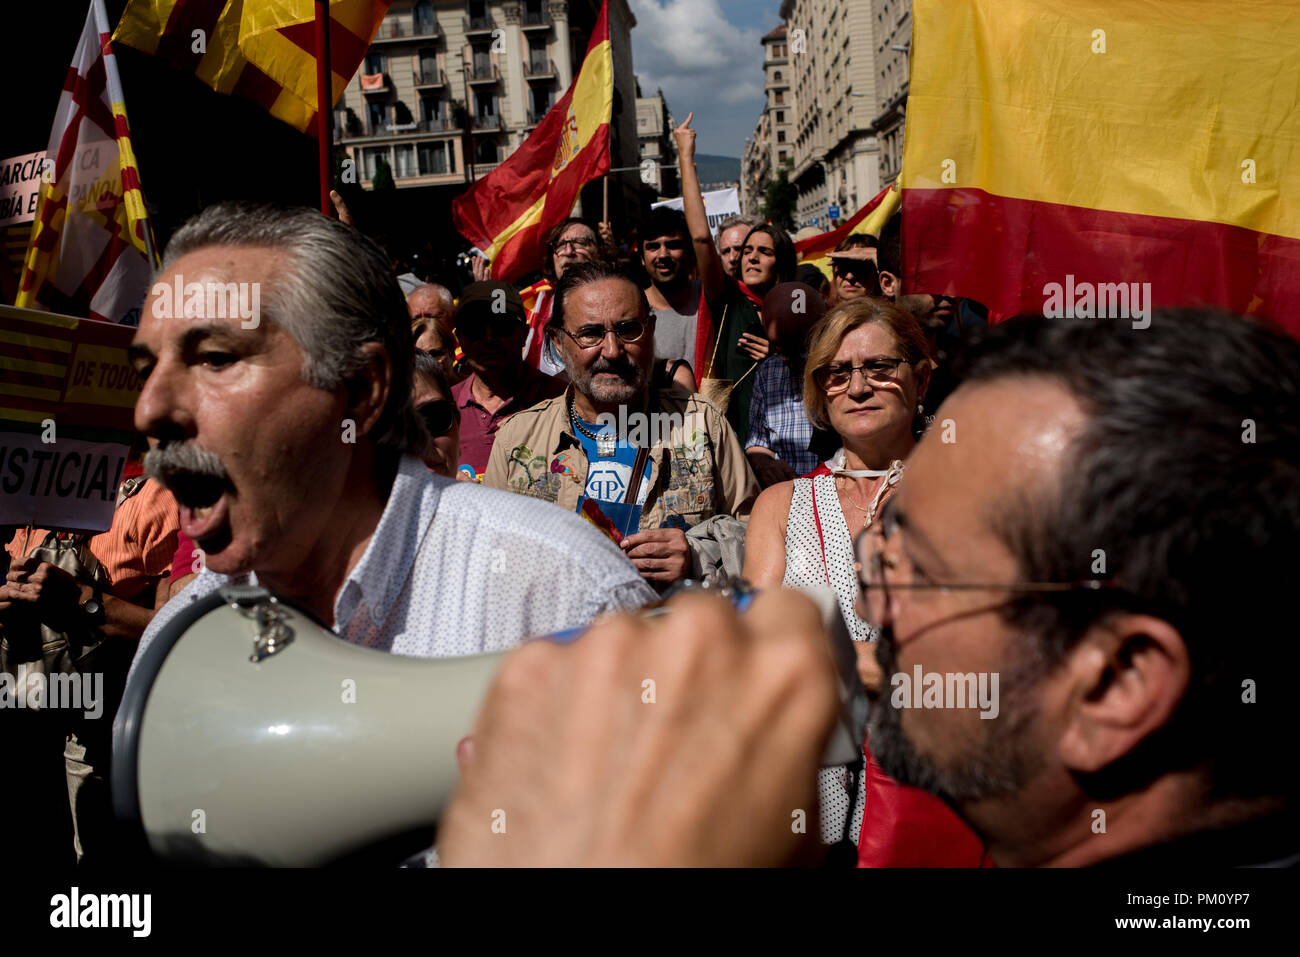 Barcelona, Spain. 16 September 2018.  Protesters called by unionist organizations face pro-independence supporters separed from them by a securtity police cordon.  Demonstrators marched in support of the use of the Spanish language and against the Language immersion system, a technique using bilingual language education (Catalan and Spanish) in the Catalan schools. Credit:  Jordi Boixareu/Alamy Live News Stock Photo